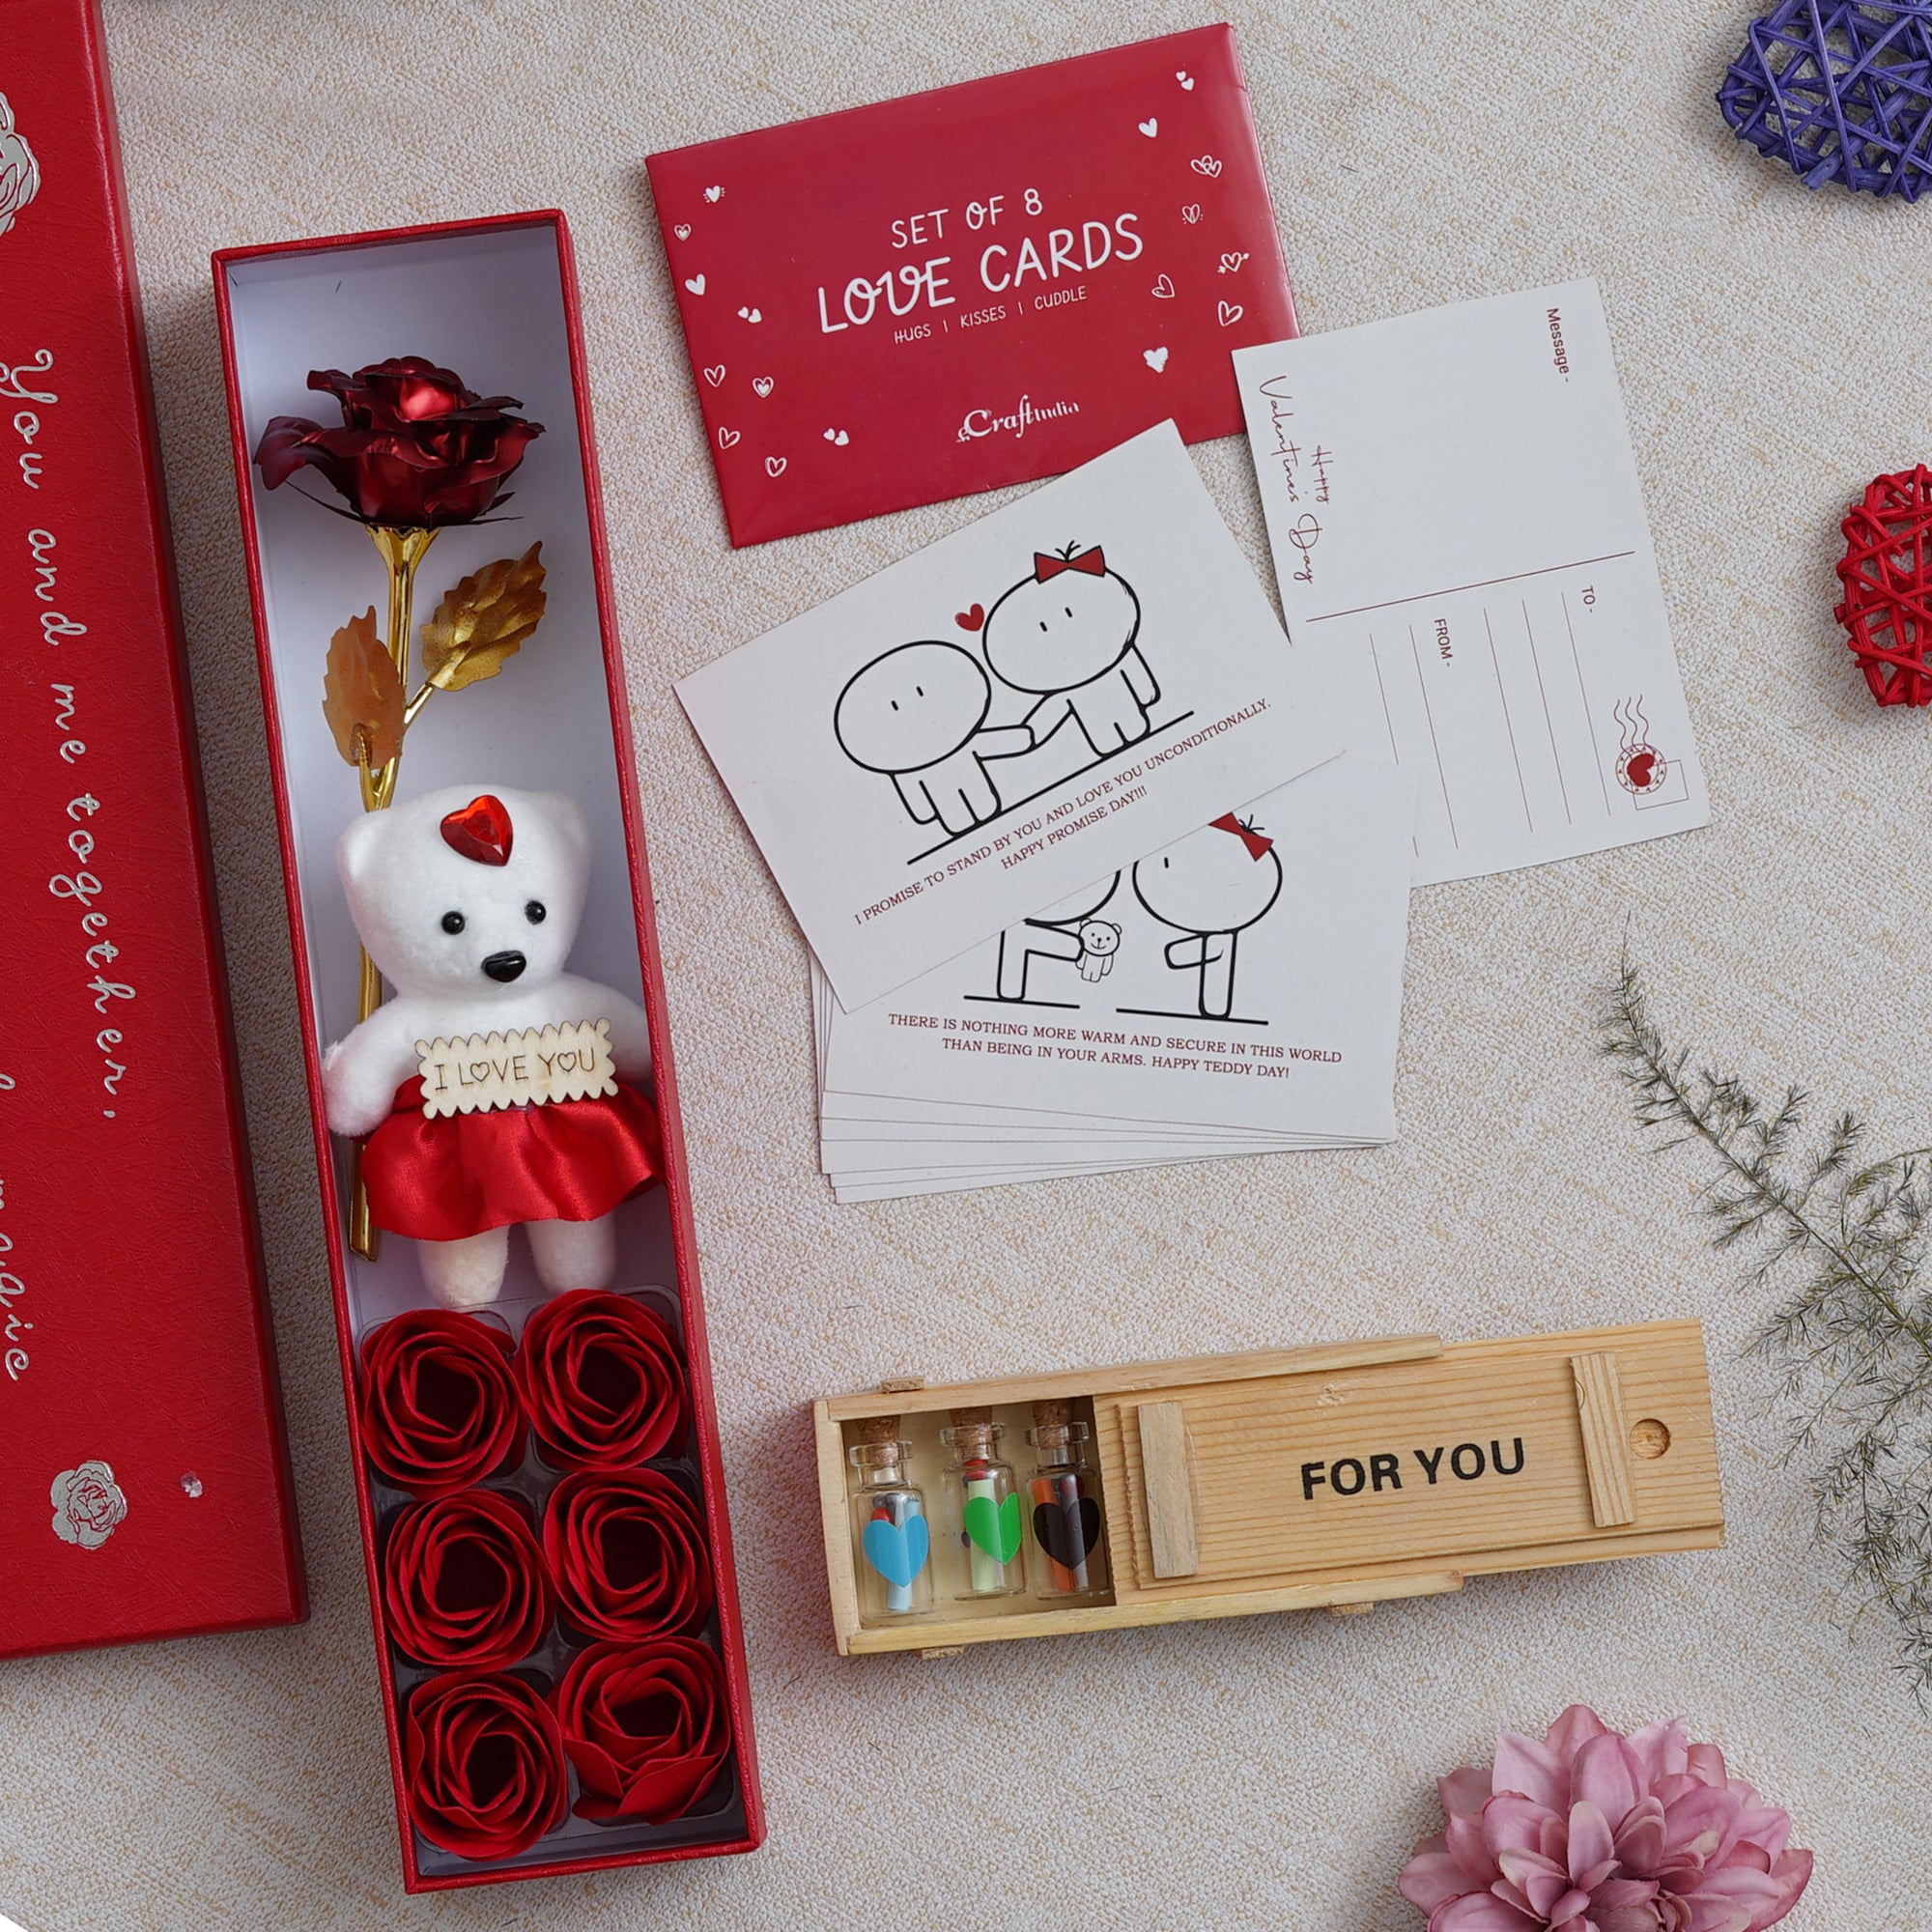 Valentine Combo of Pack of 8 Love Gift Cards, Red Gift Box with Teddy & Roses, Wooden Box "For You" Message Bottle Set